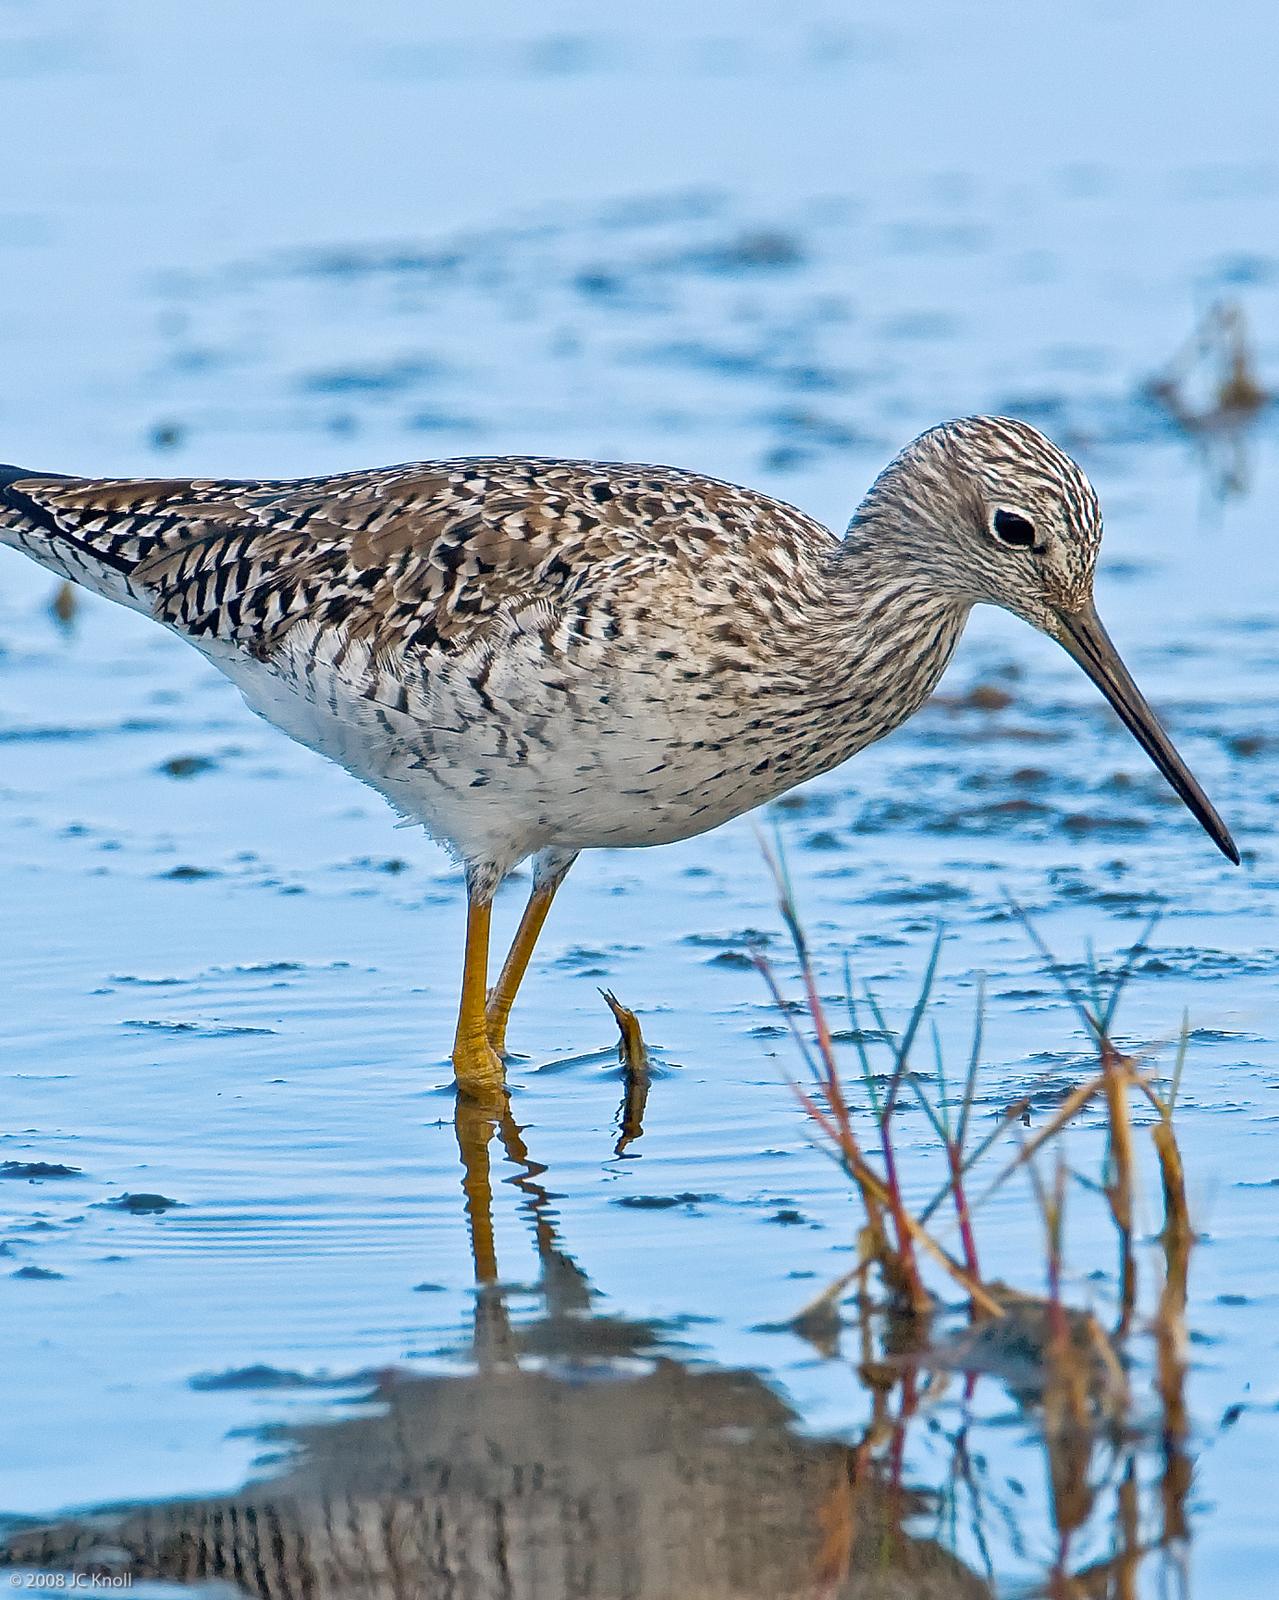 Greater Yellowlegs Photo by JC Knoll